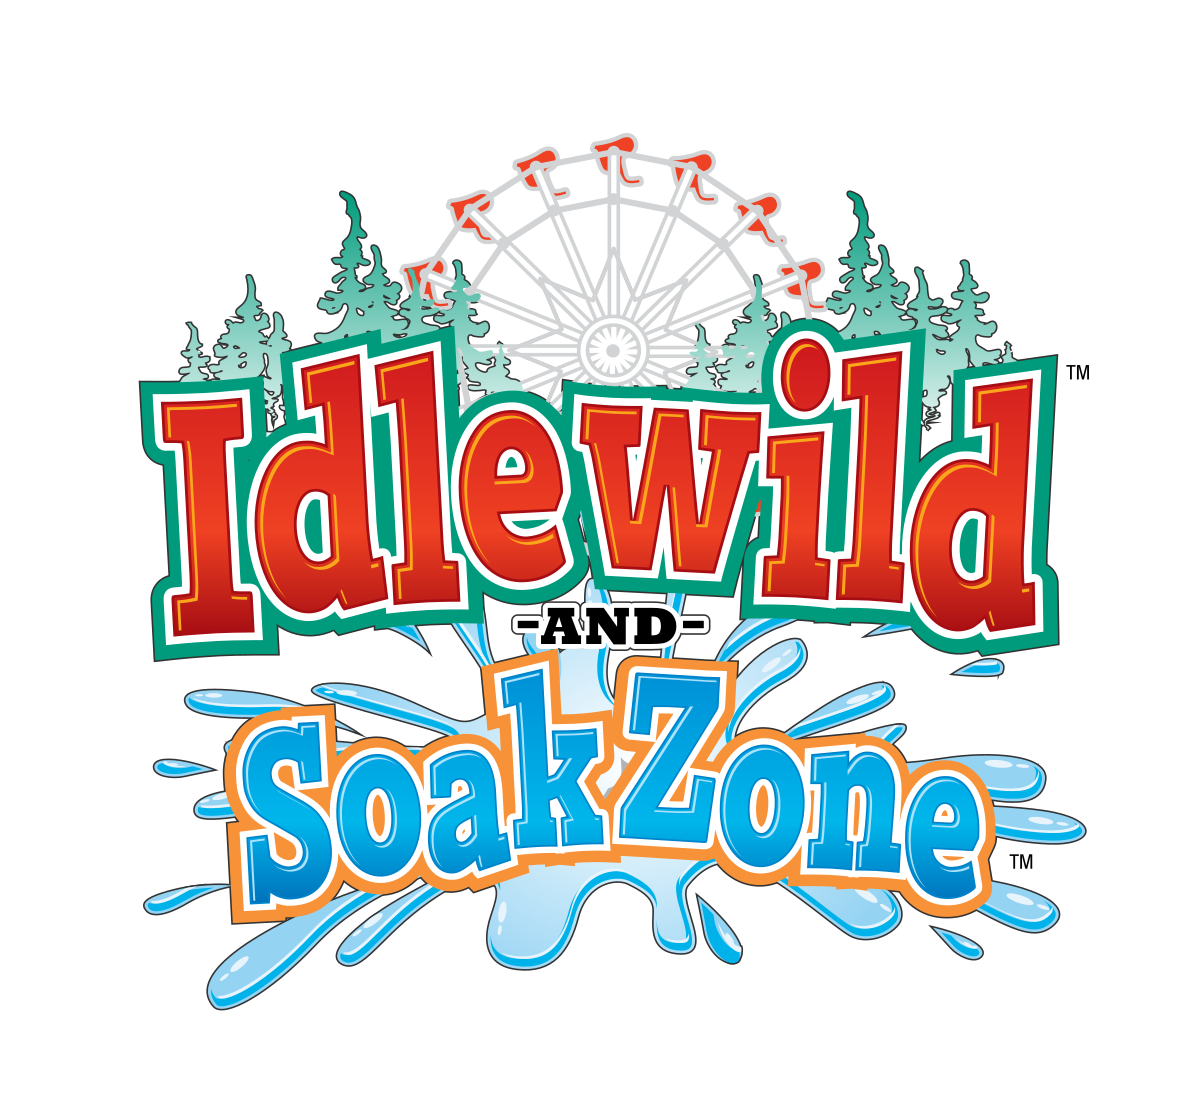 Image for January 2020 Member of the Month-Idlewild and SoakZone